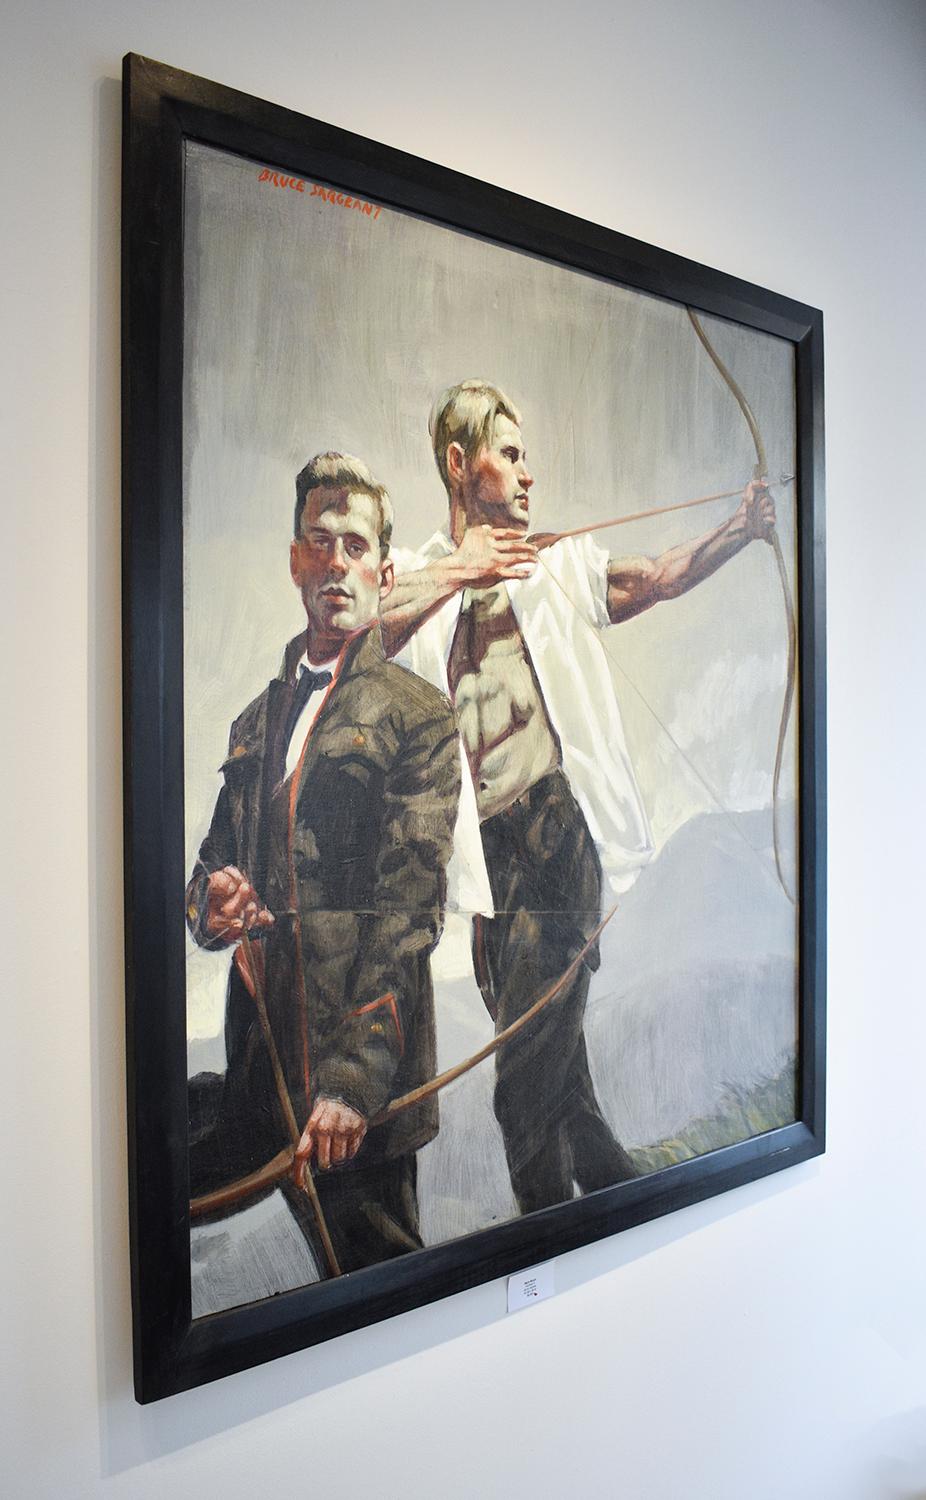 Archers II: Academic Figurative Painting of Two Men Bow Hunting by Mark Beard 3